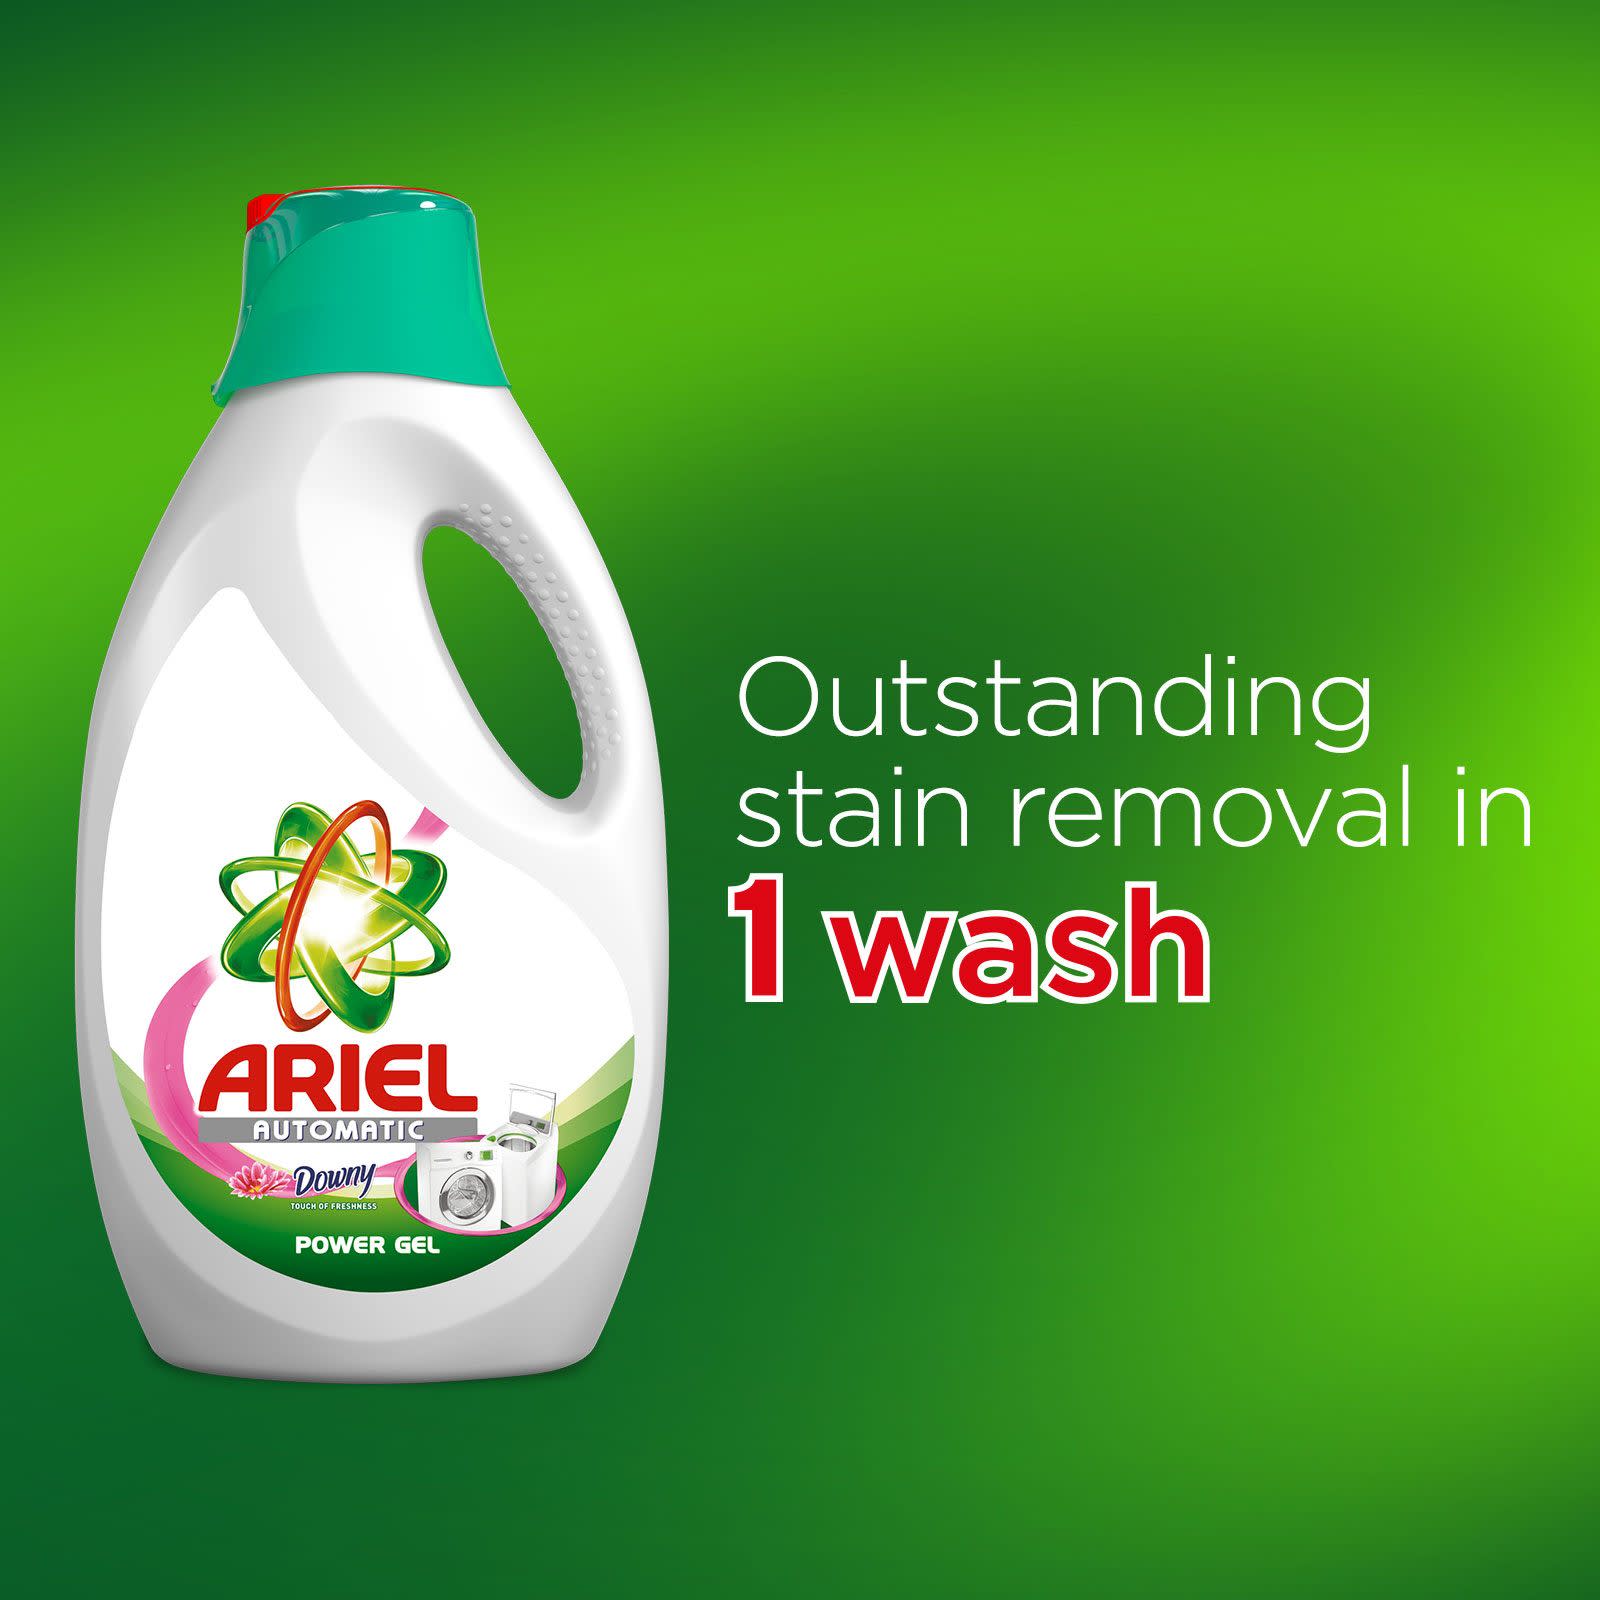 Ariel Automatic All in 1 PODS Laundry Detergent Touch of Freshness